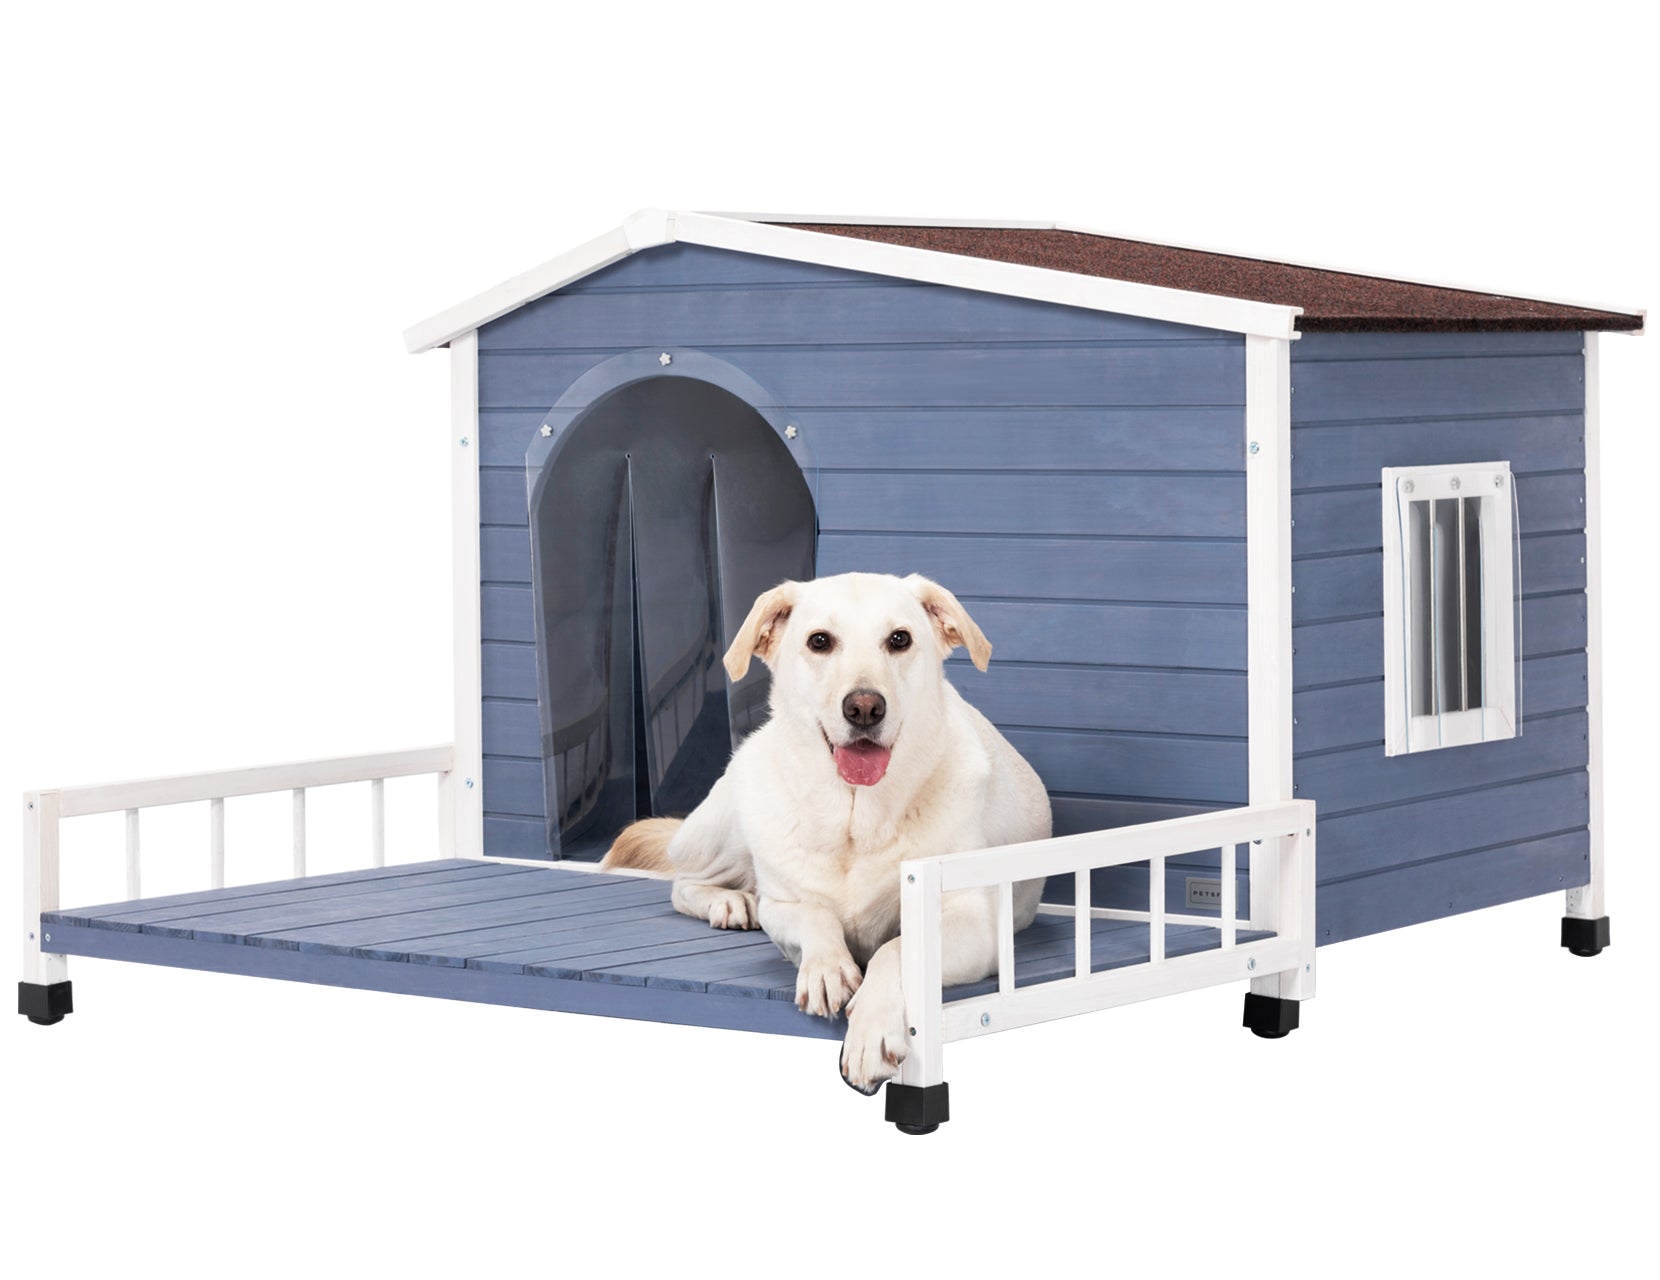 Petsfit Weatherproof Dog House with Porch & Openable Asphalt Roof-Pet Supplies